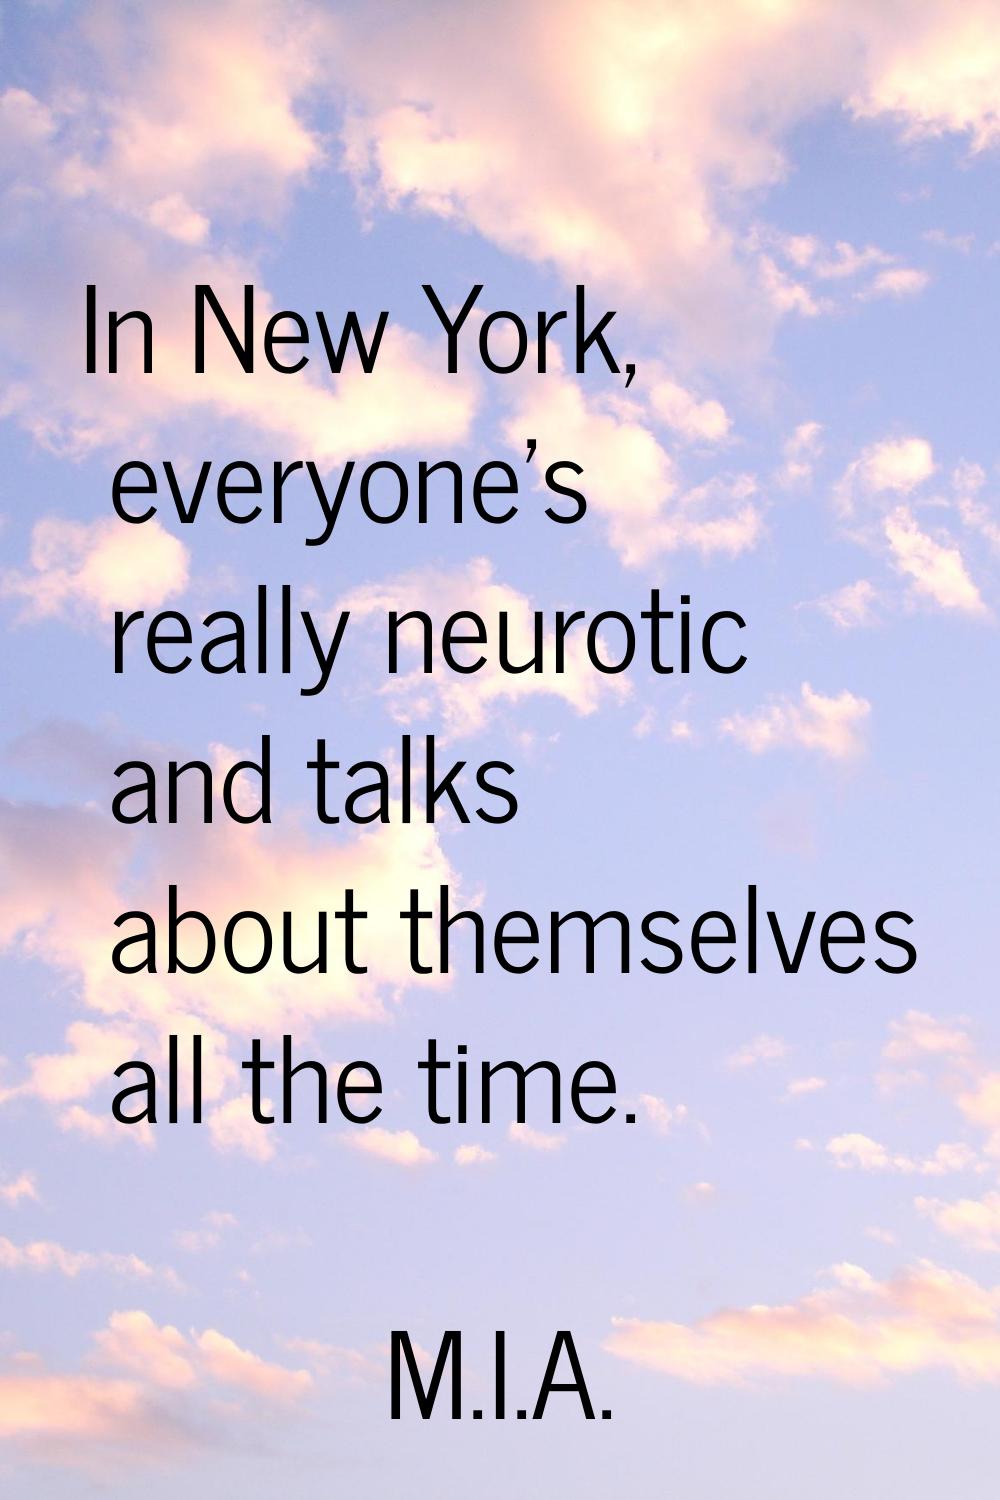 In New York, everyone's really neurotic and talks about themselves all the time.